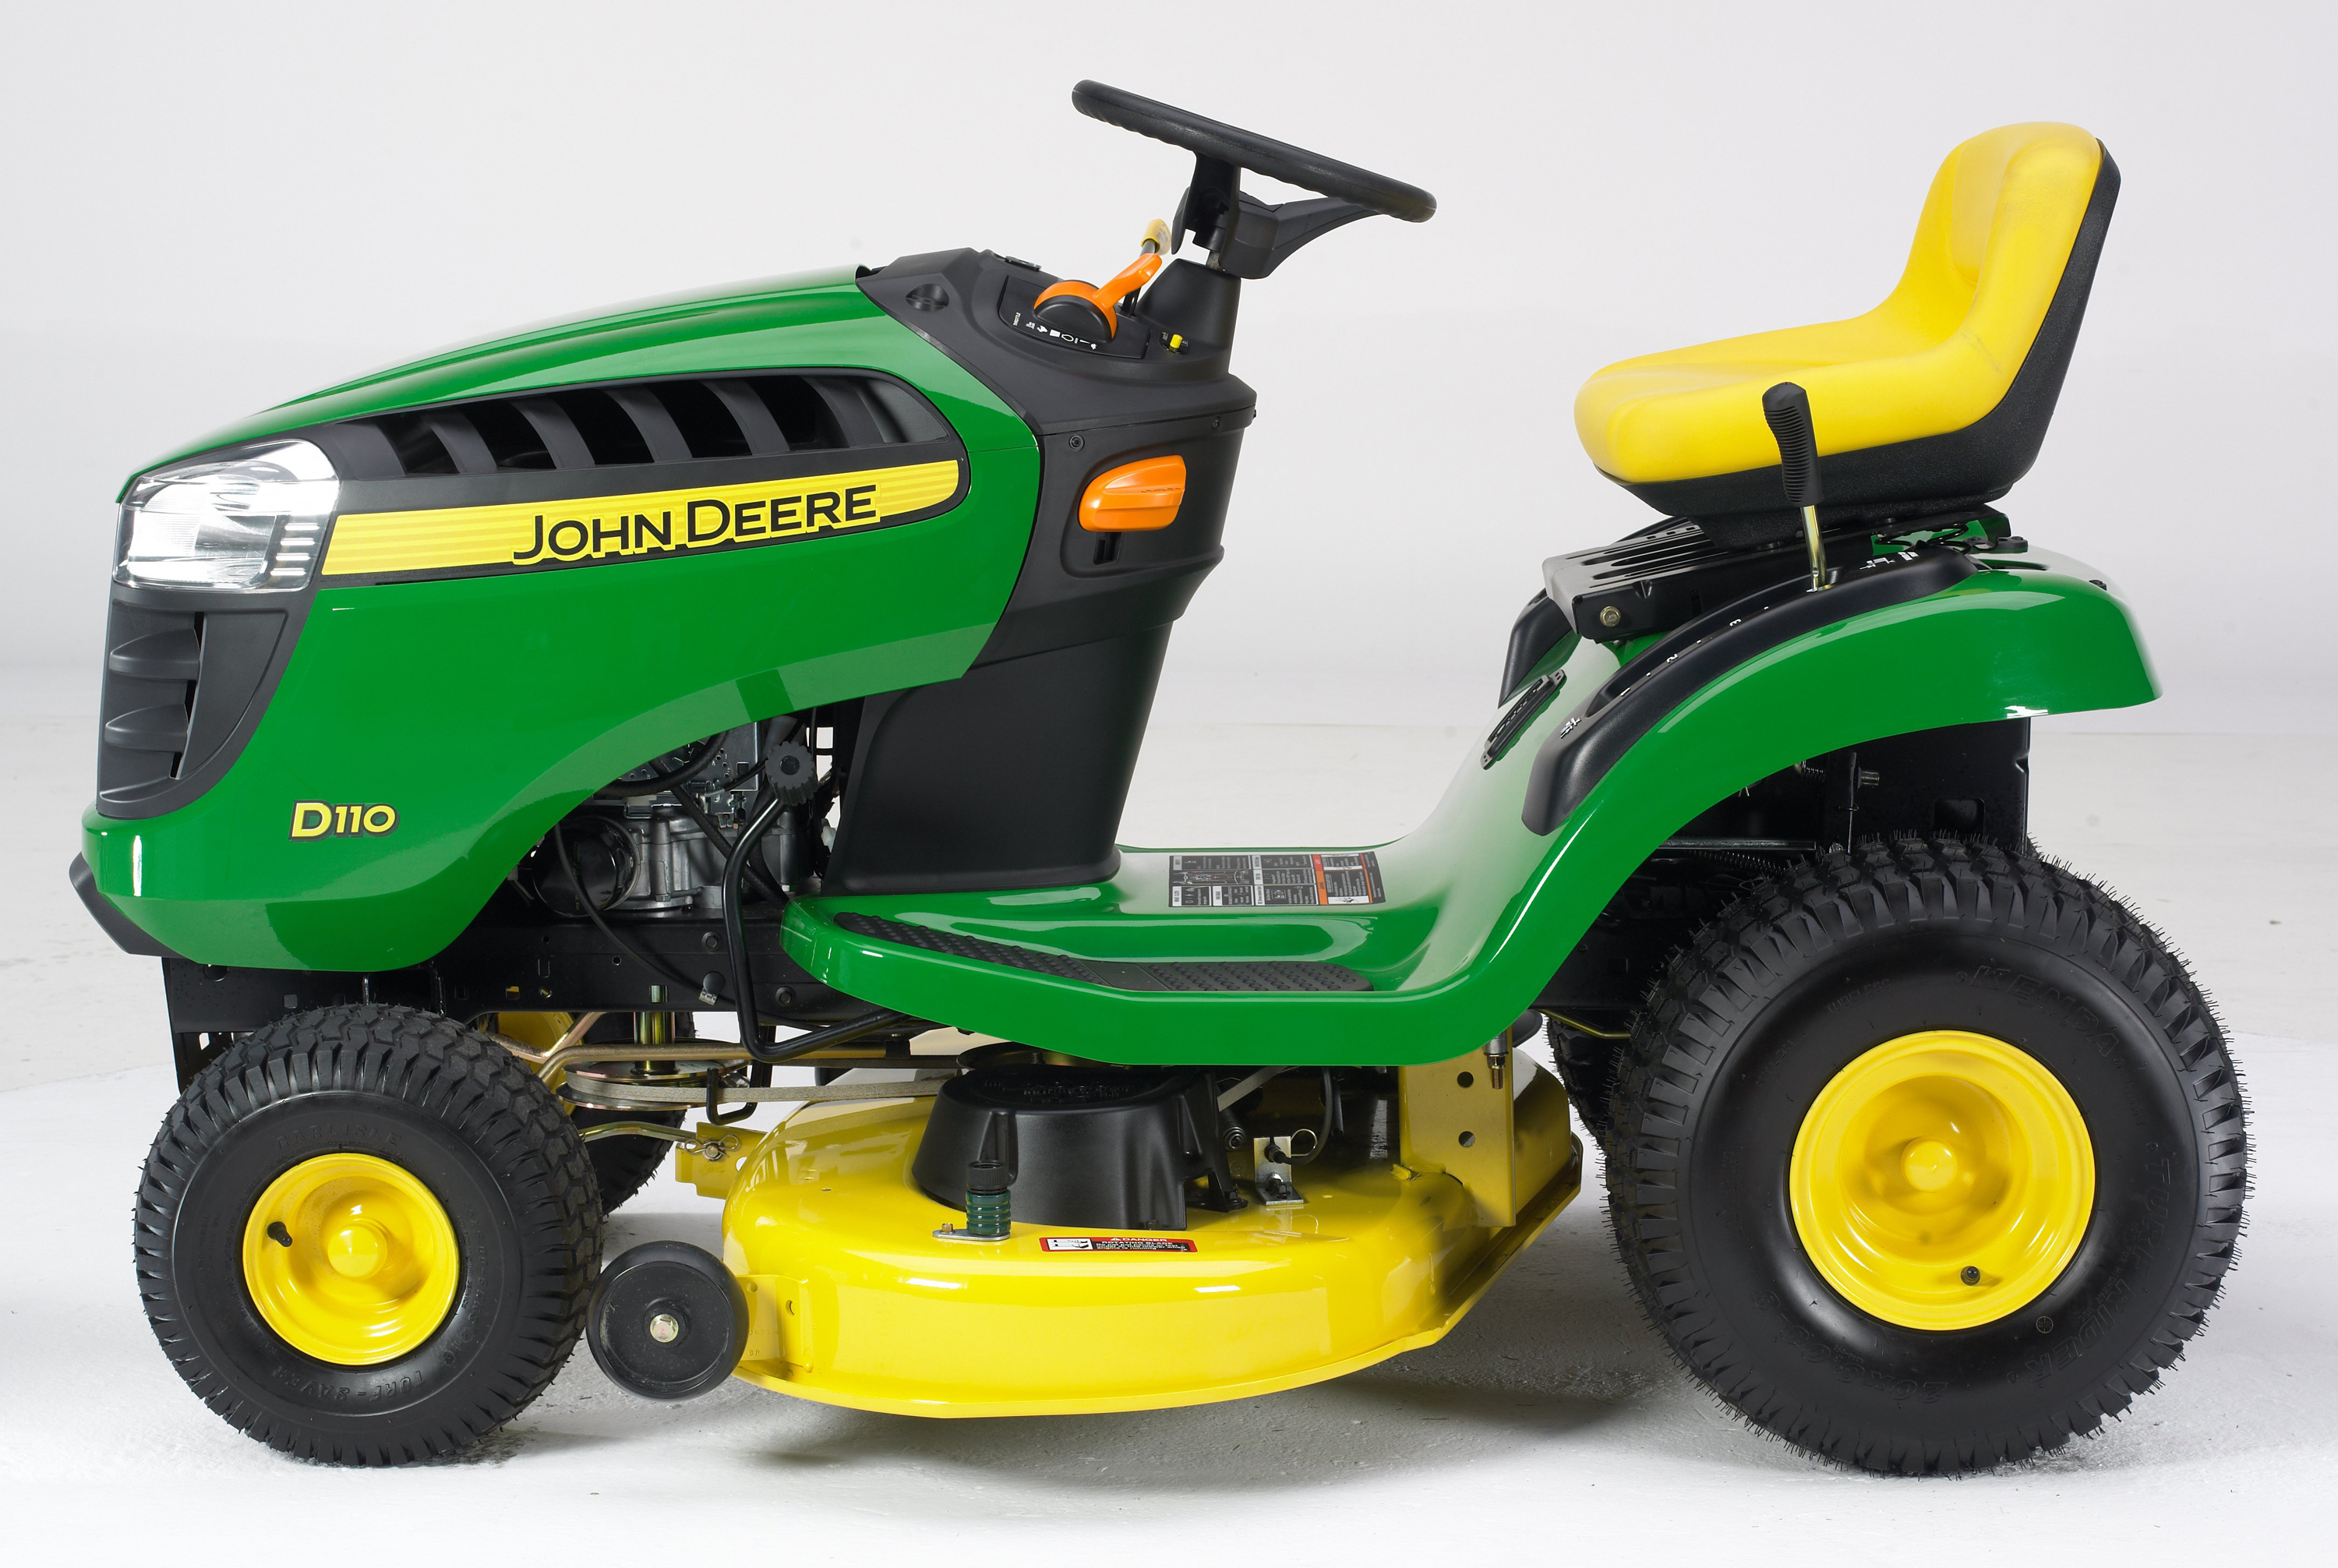 John Deere Unveils the New 100 Series Lawn Tractor